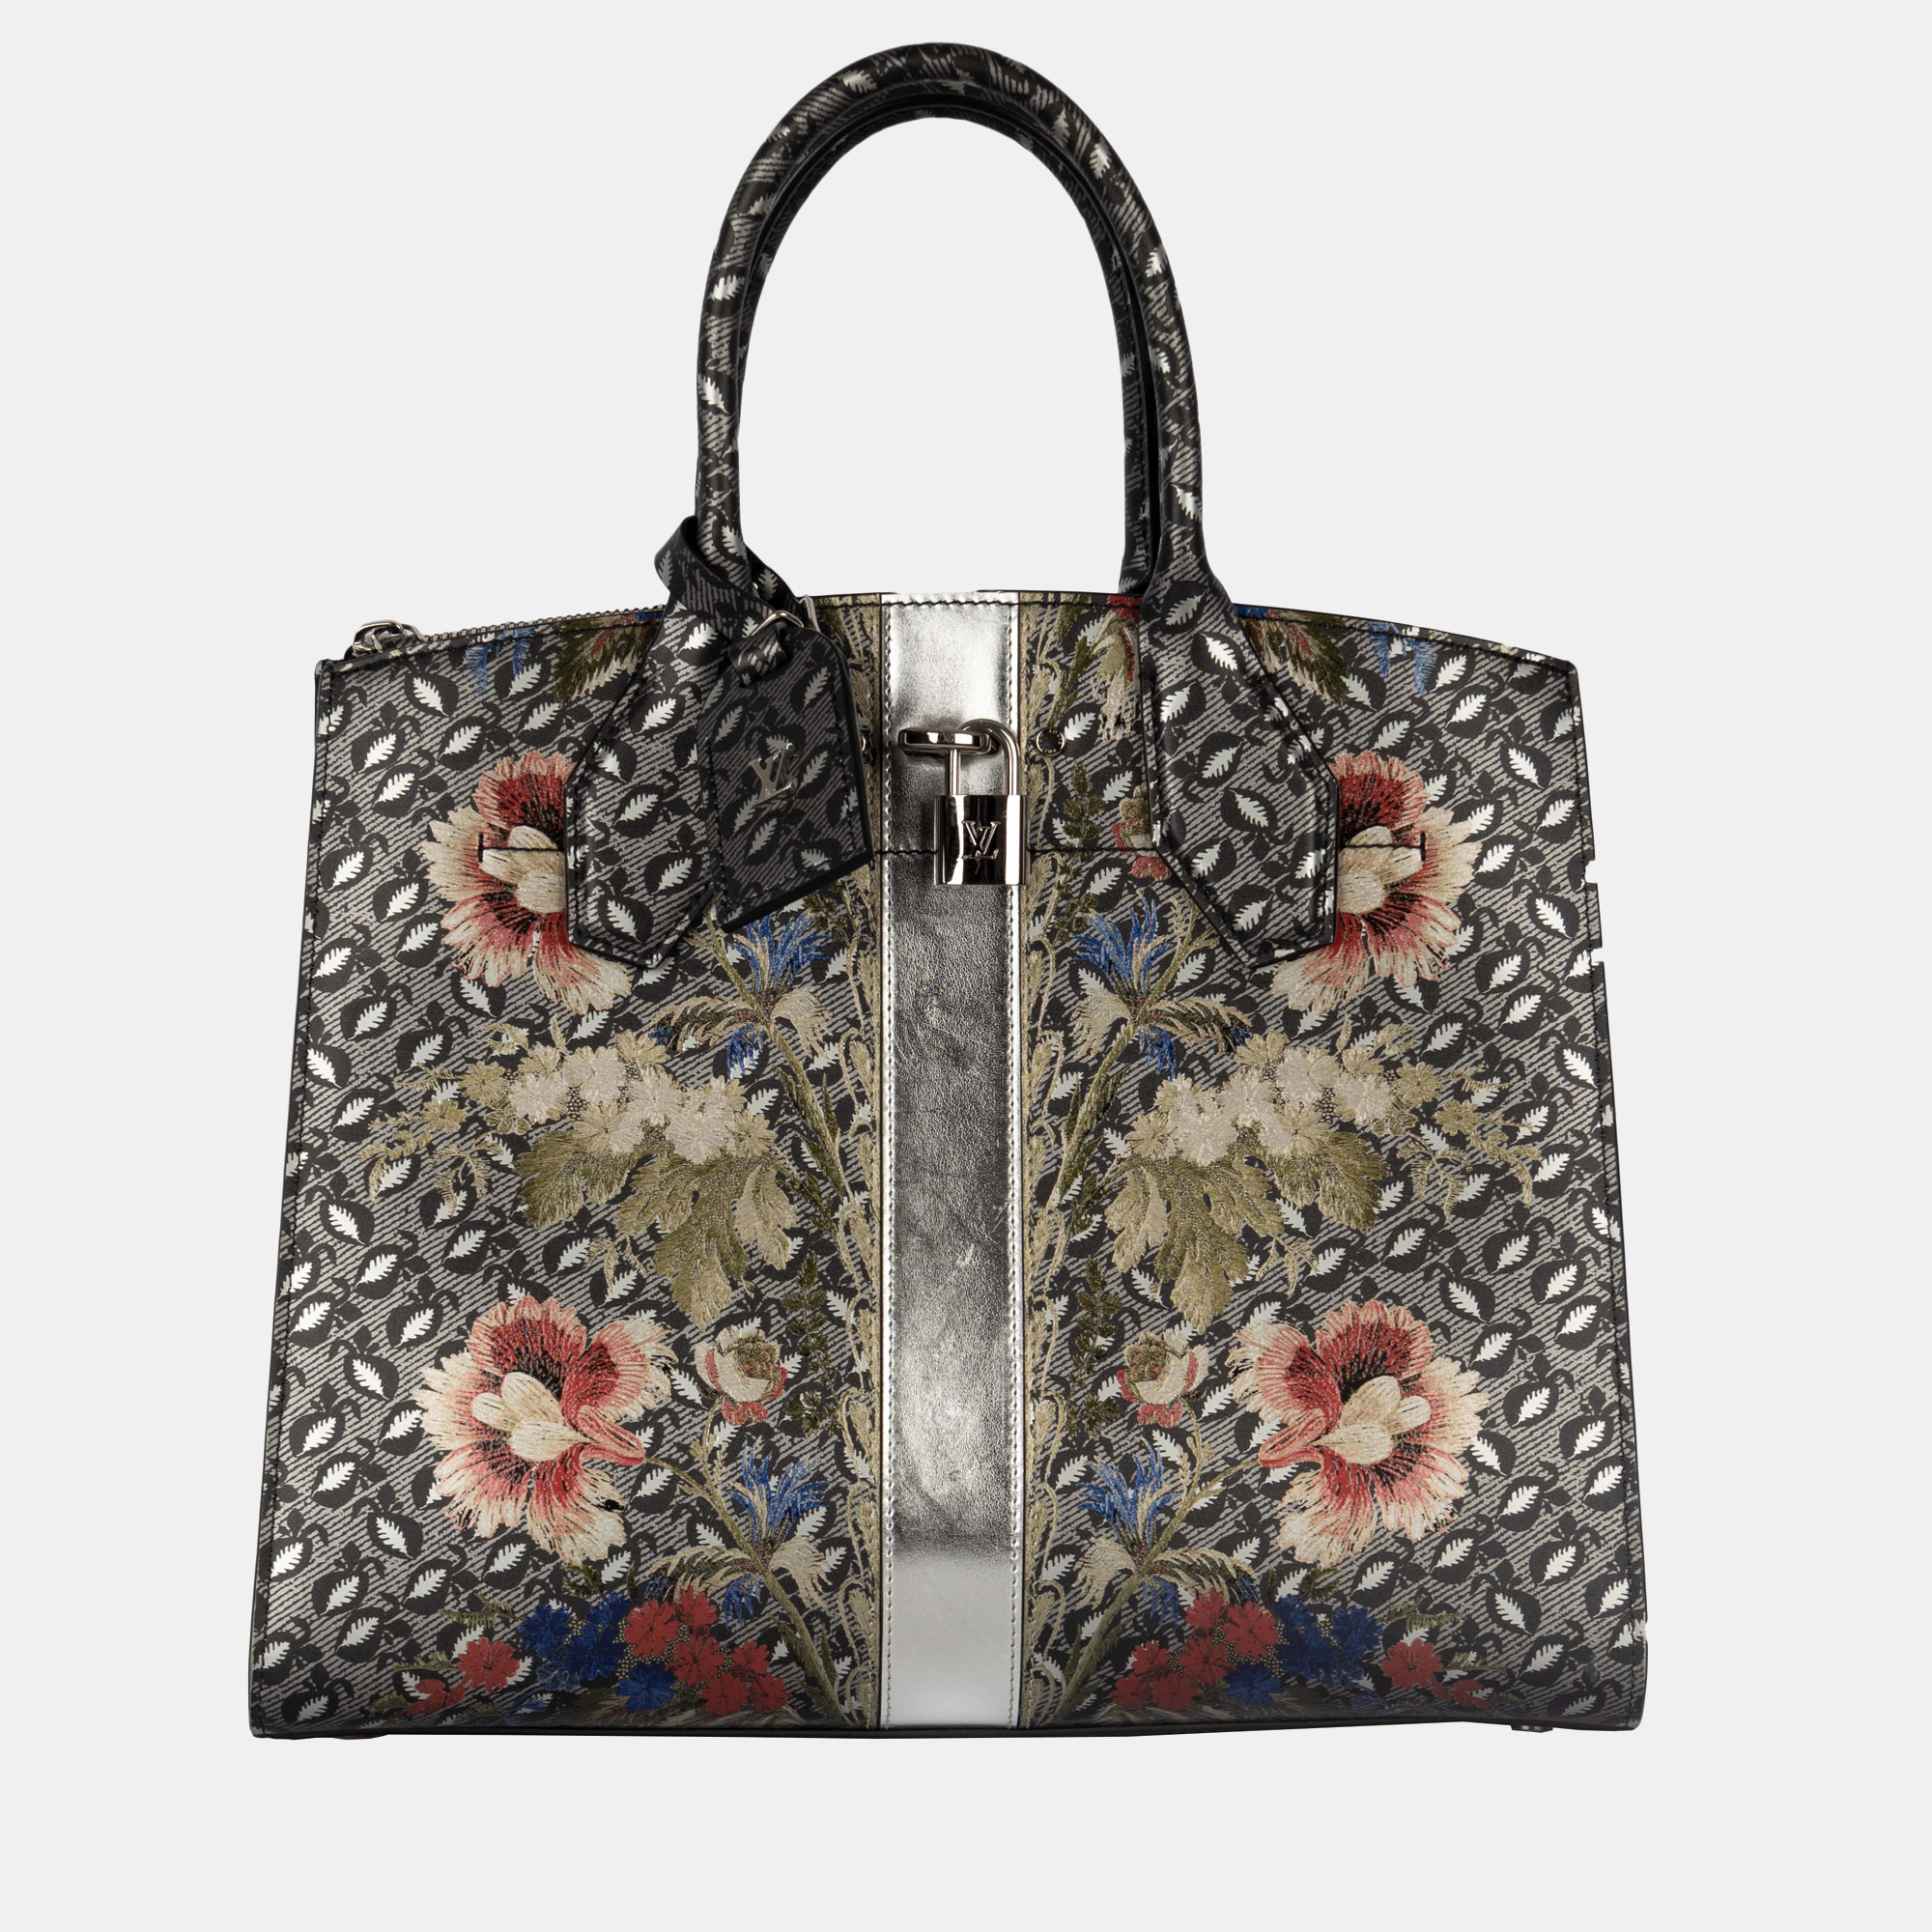 Launched under the S/S 2018 collection this Louis Vuitton Epi Floral City Steamer MM is a vision to behold. With the romantic multicolored floral print accentuated by with silver panel in the center the metallic attachments and hardware are engraved with brand emblems such as the monogram and brand name.